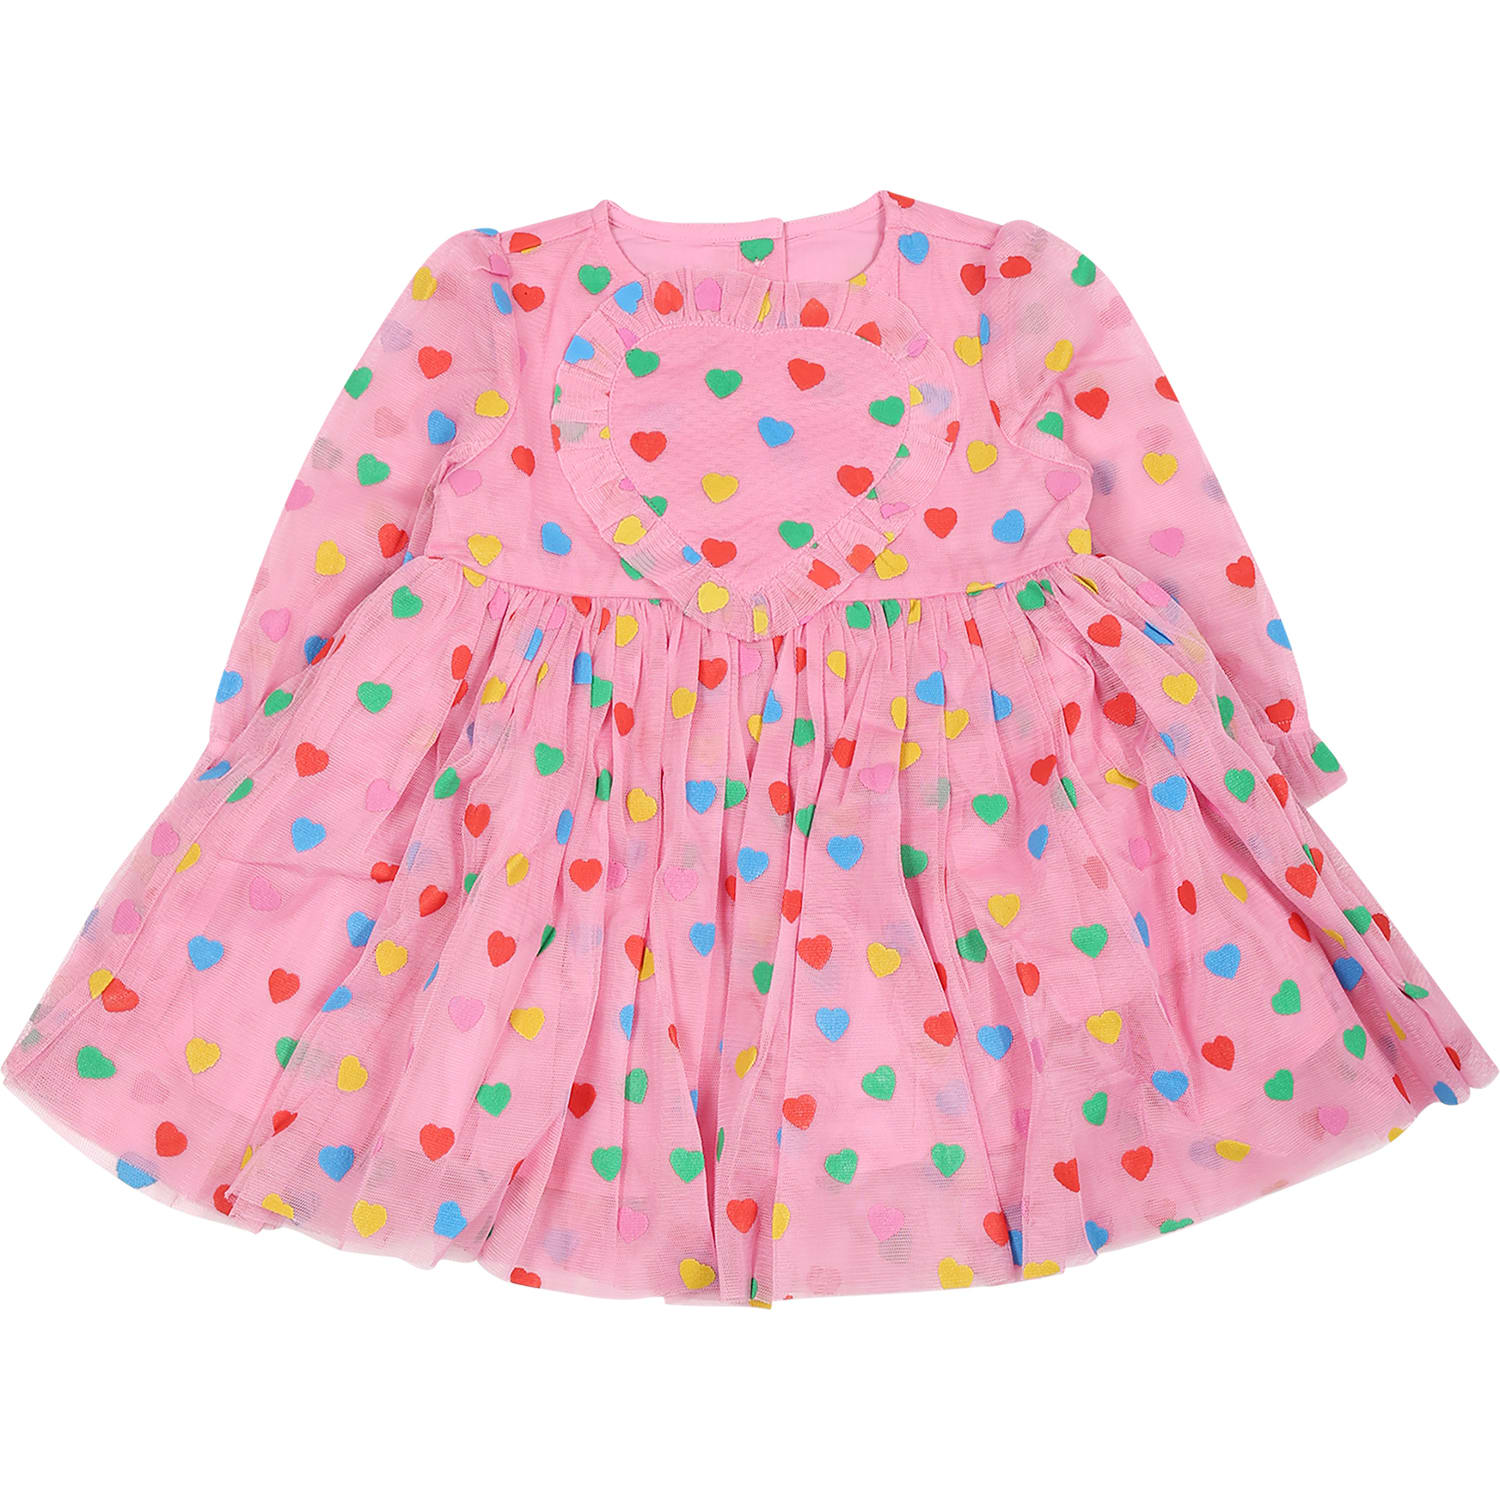 STELLA MCCARTNEY PINK DRESS FOR BABY GIRL WITH HEARTS